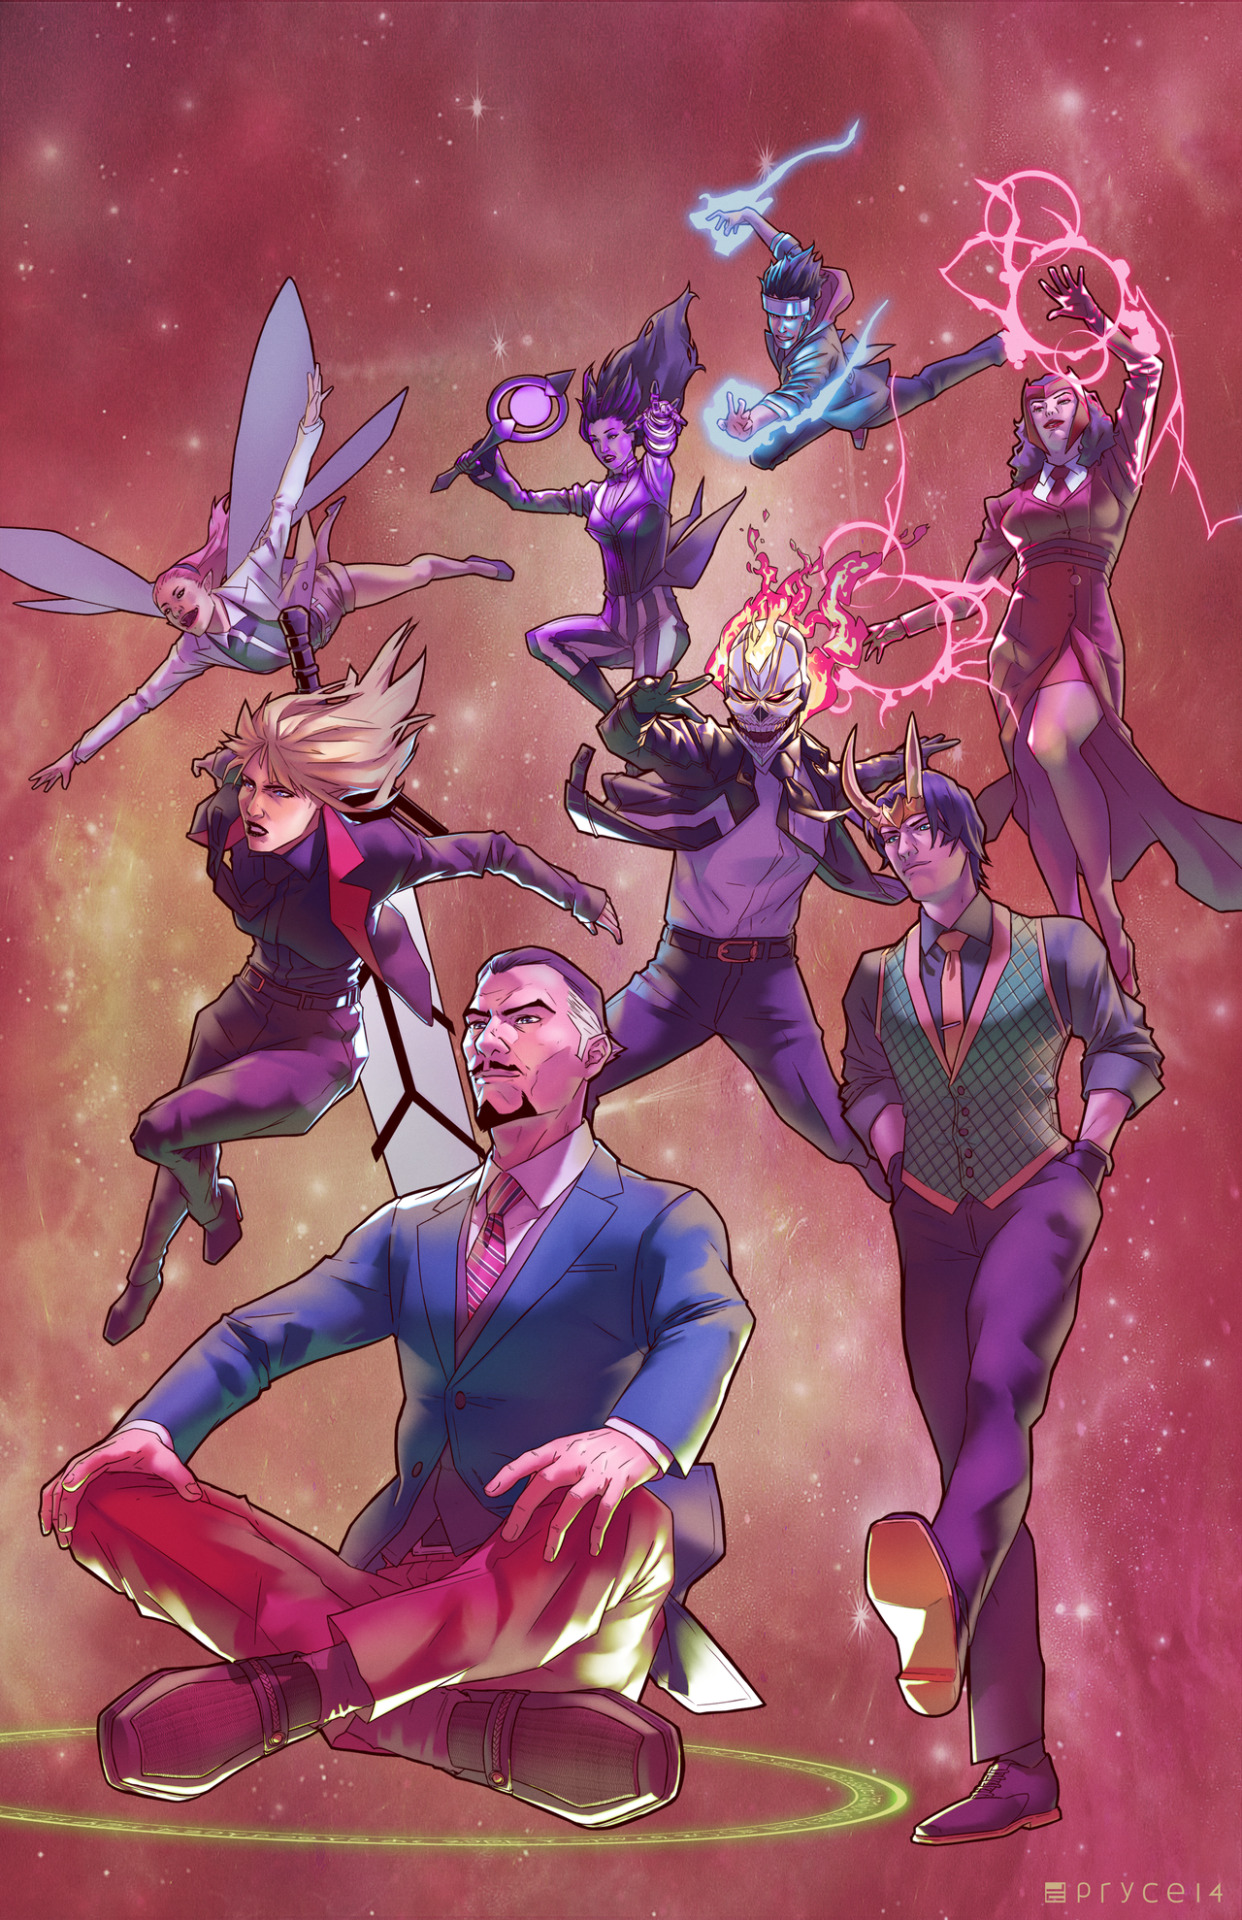 The All-New Defenders by Pryce14
Another dream roster thingie.
I haven’t read much of Marvel’s more mystic-themed comics, but I’ve grown particularly fond of Nico, Wiccan, and the new Ghost Rider, and I’ve always found Doctor Strange and Scarlet...